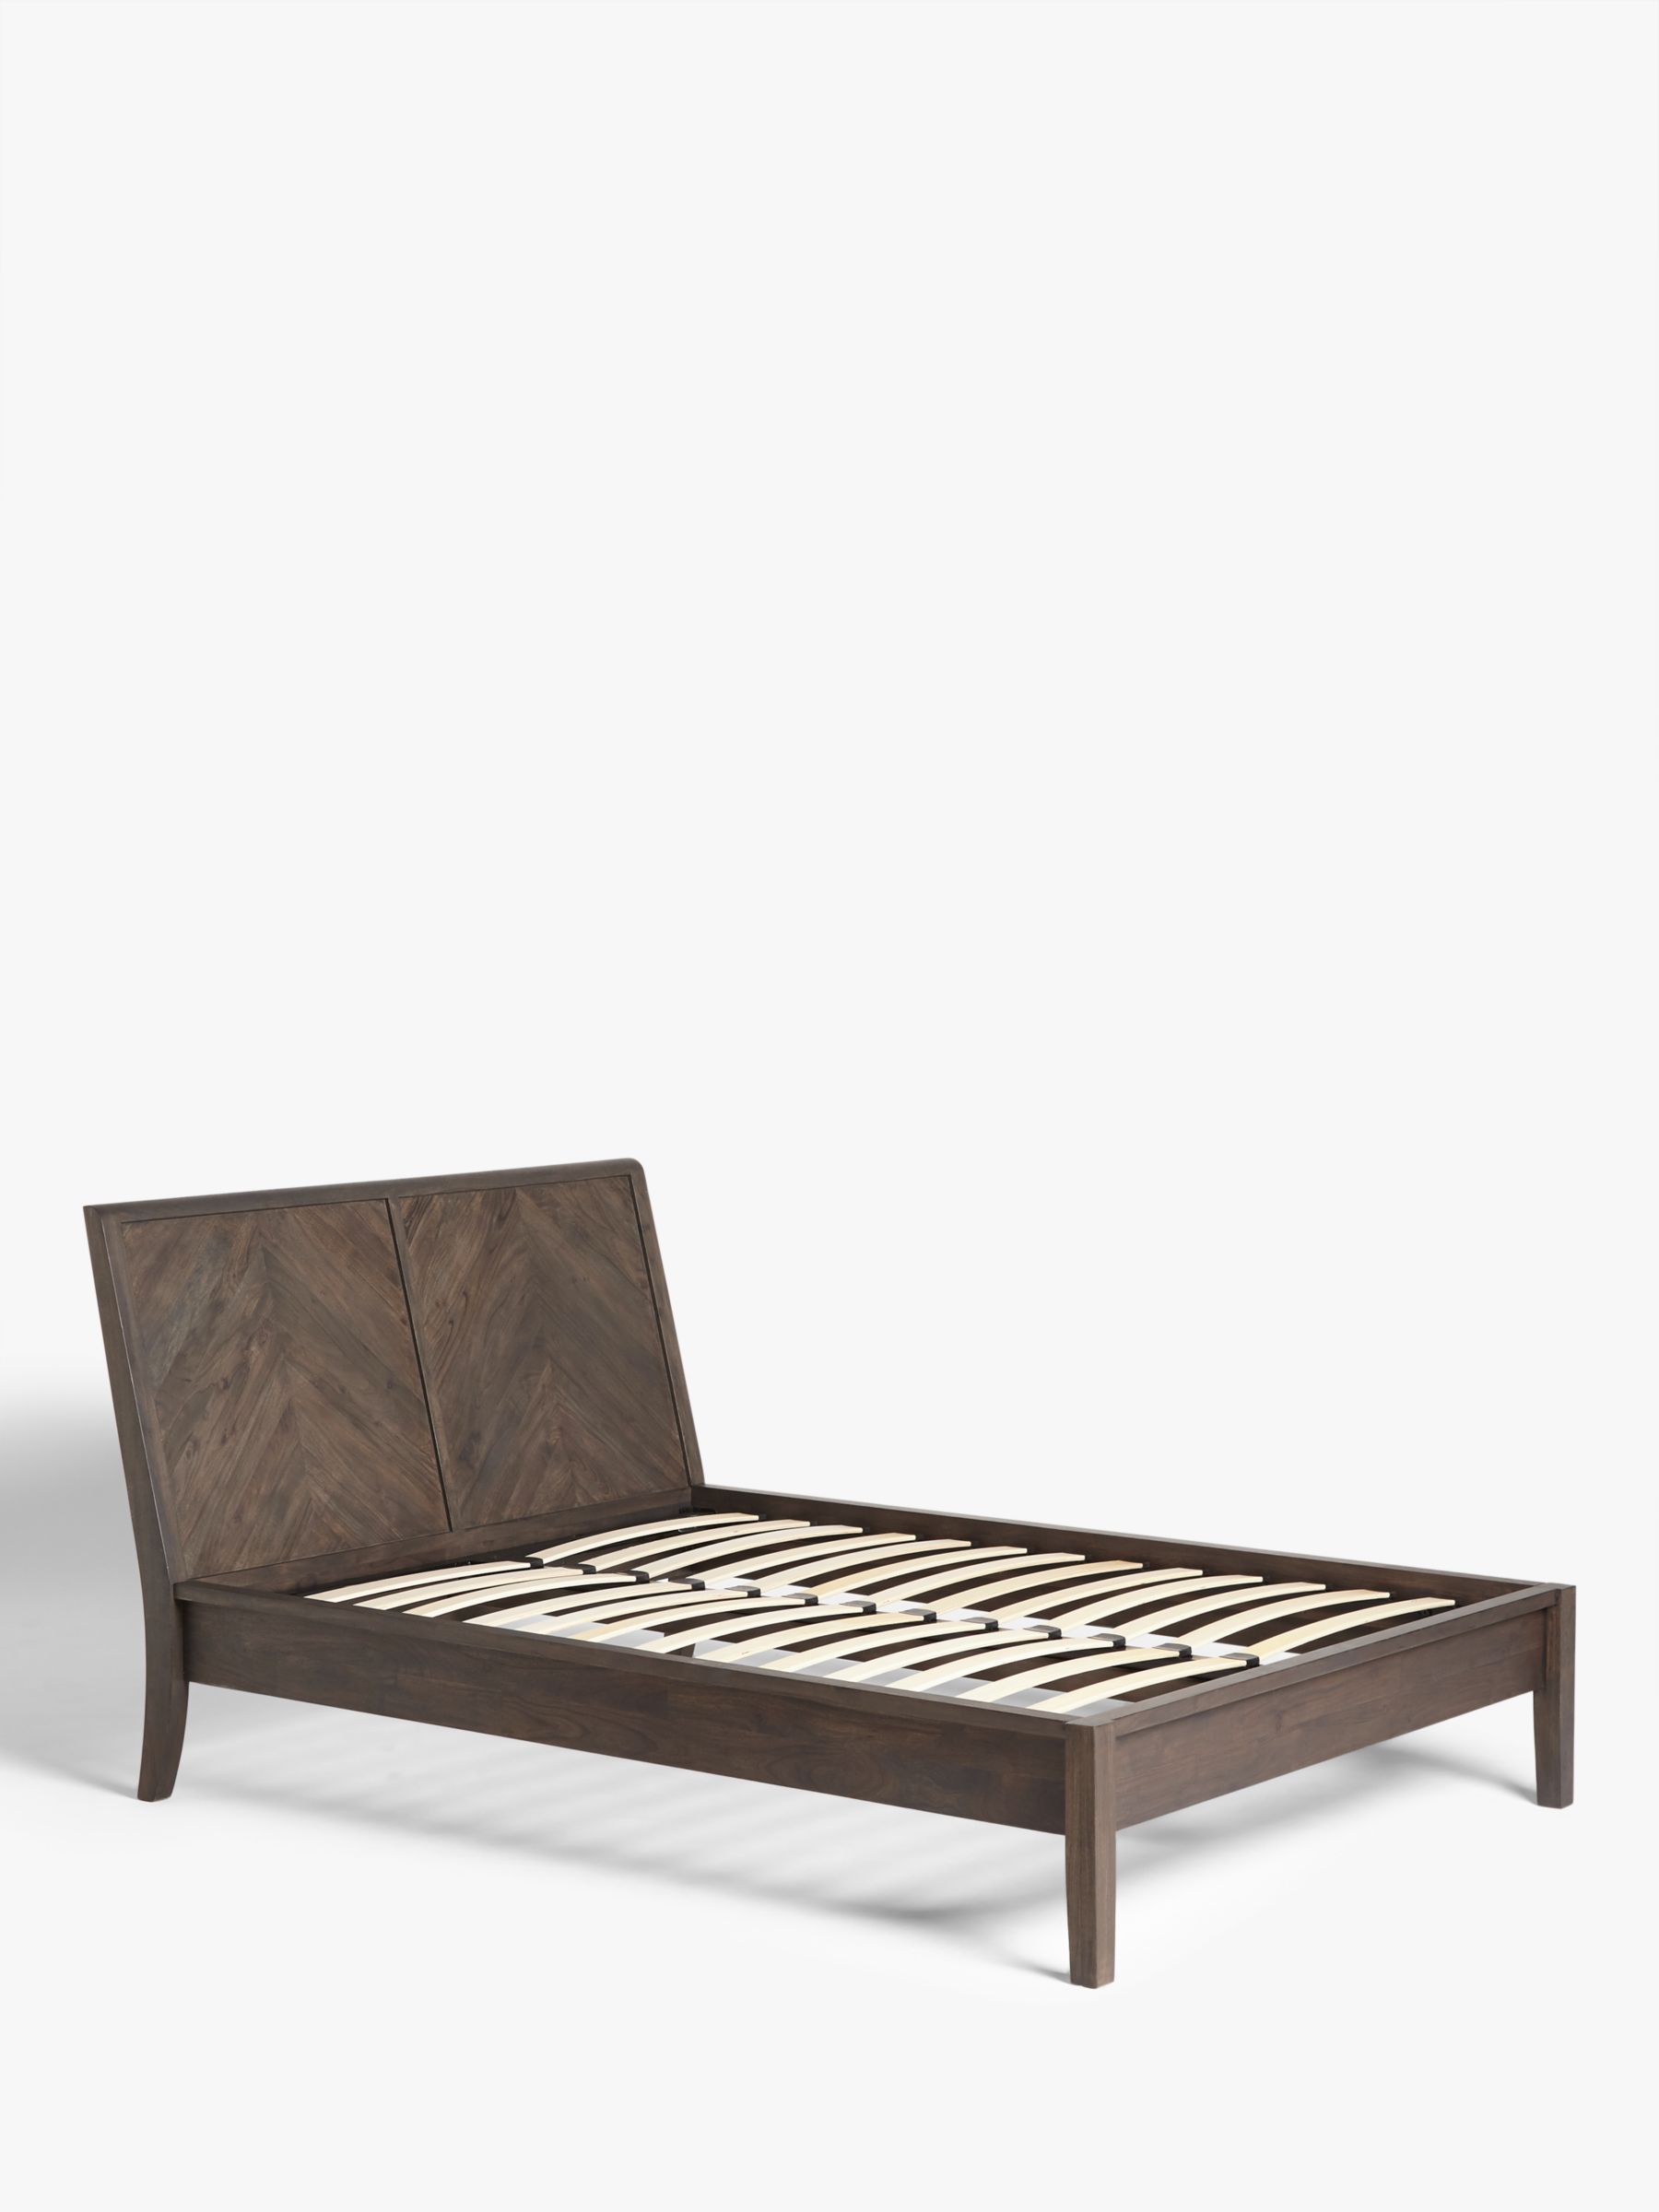 Photo of John lewis padma parquet bed frame double